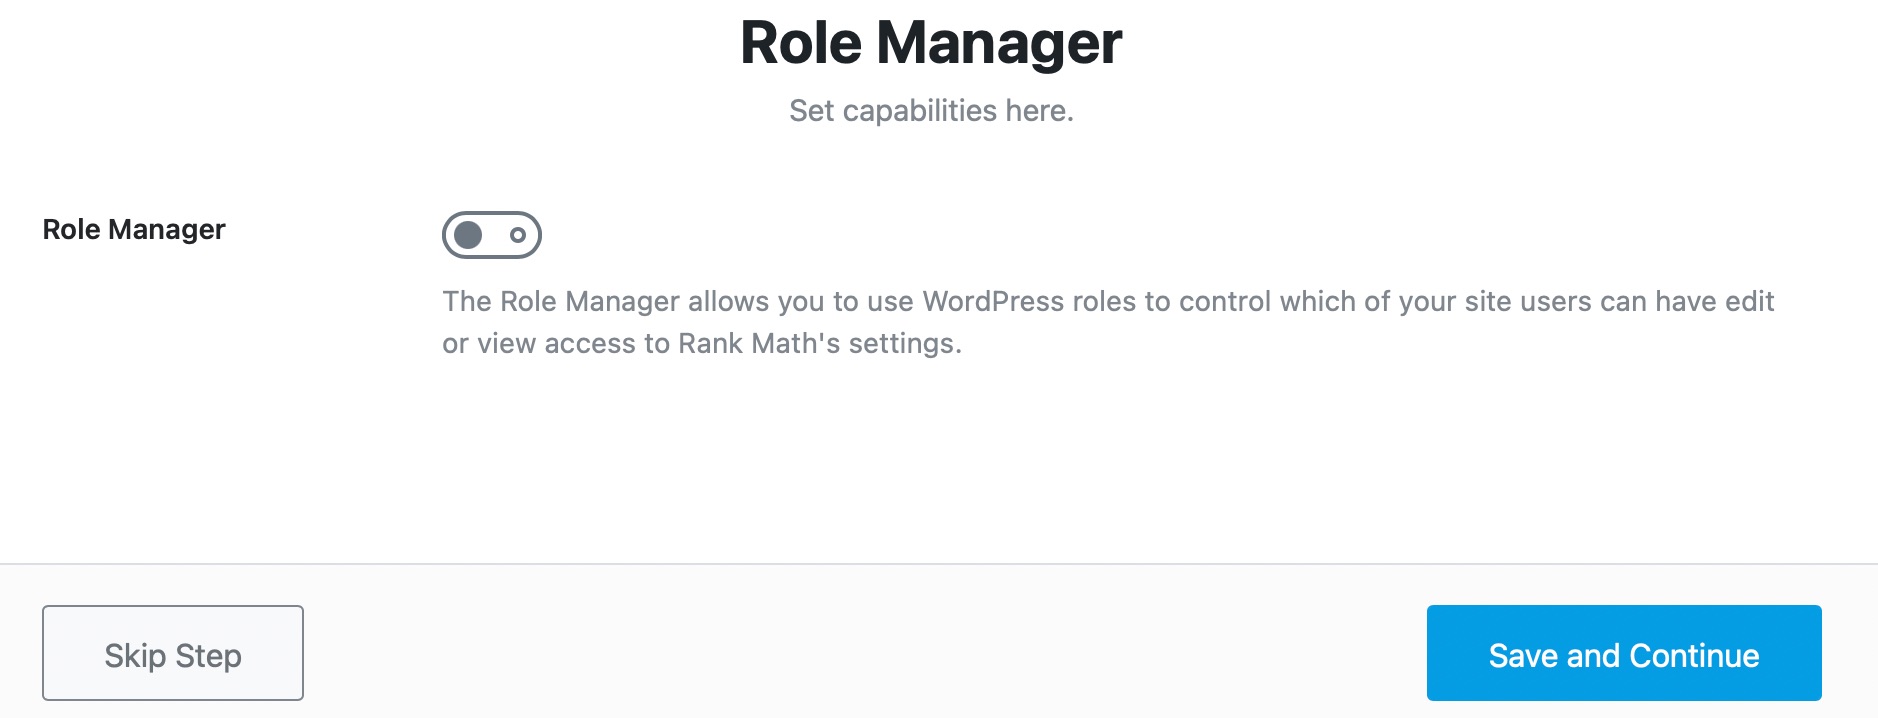 Role Manager Settings In Rank Math